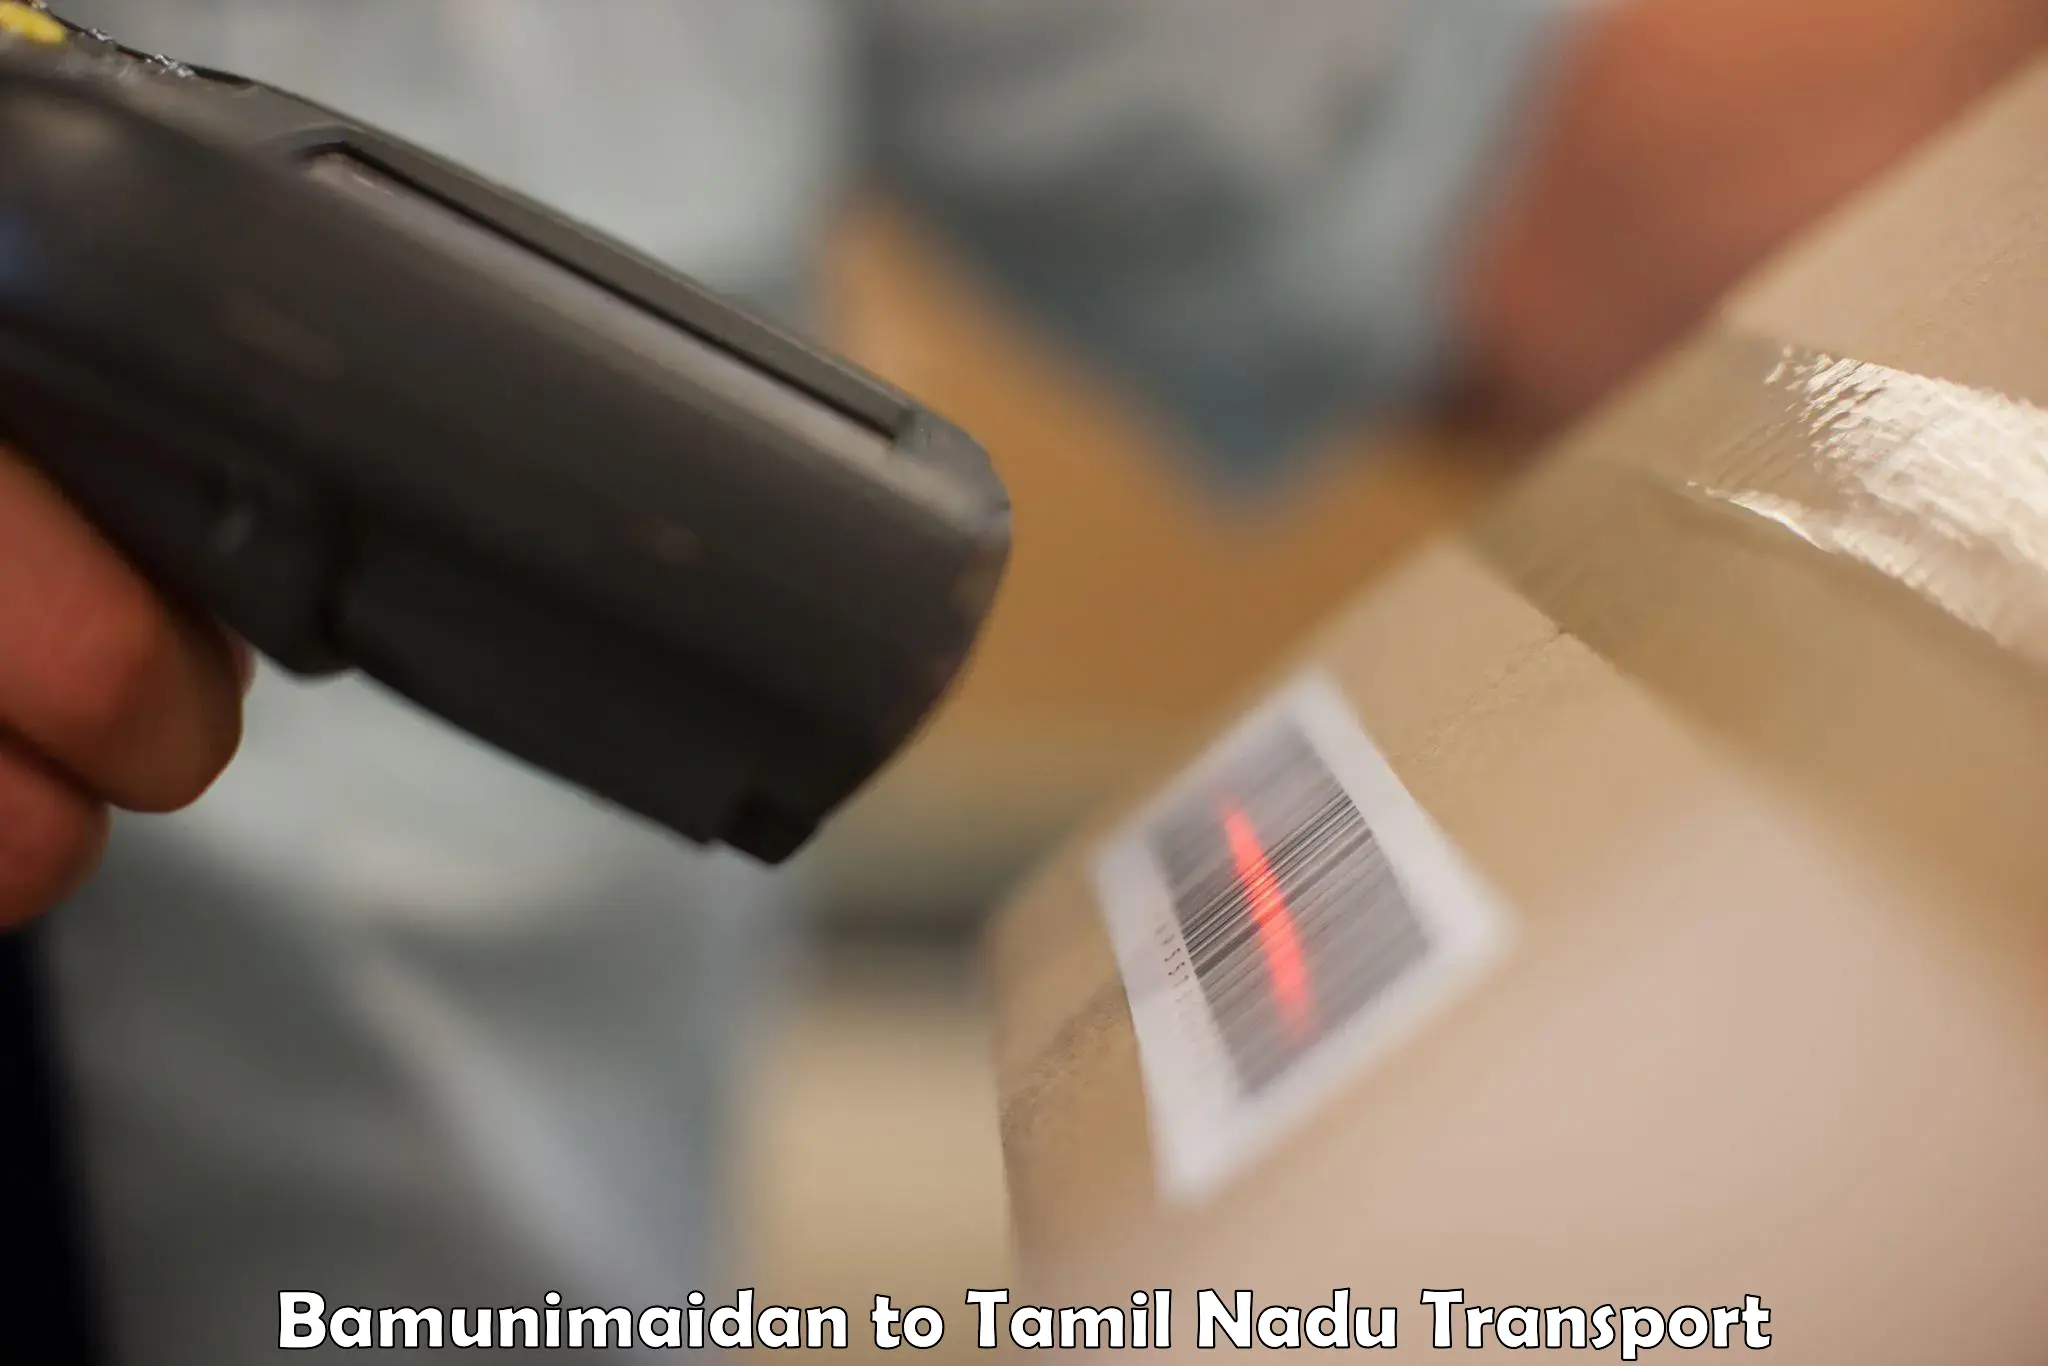 Package delivery services in Bamunimaidan to Thiruvadanai